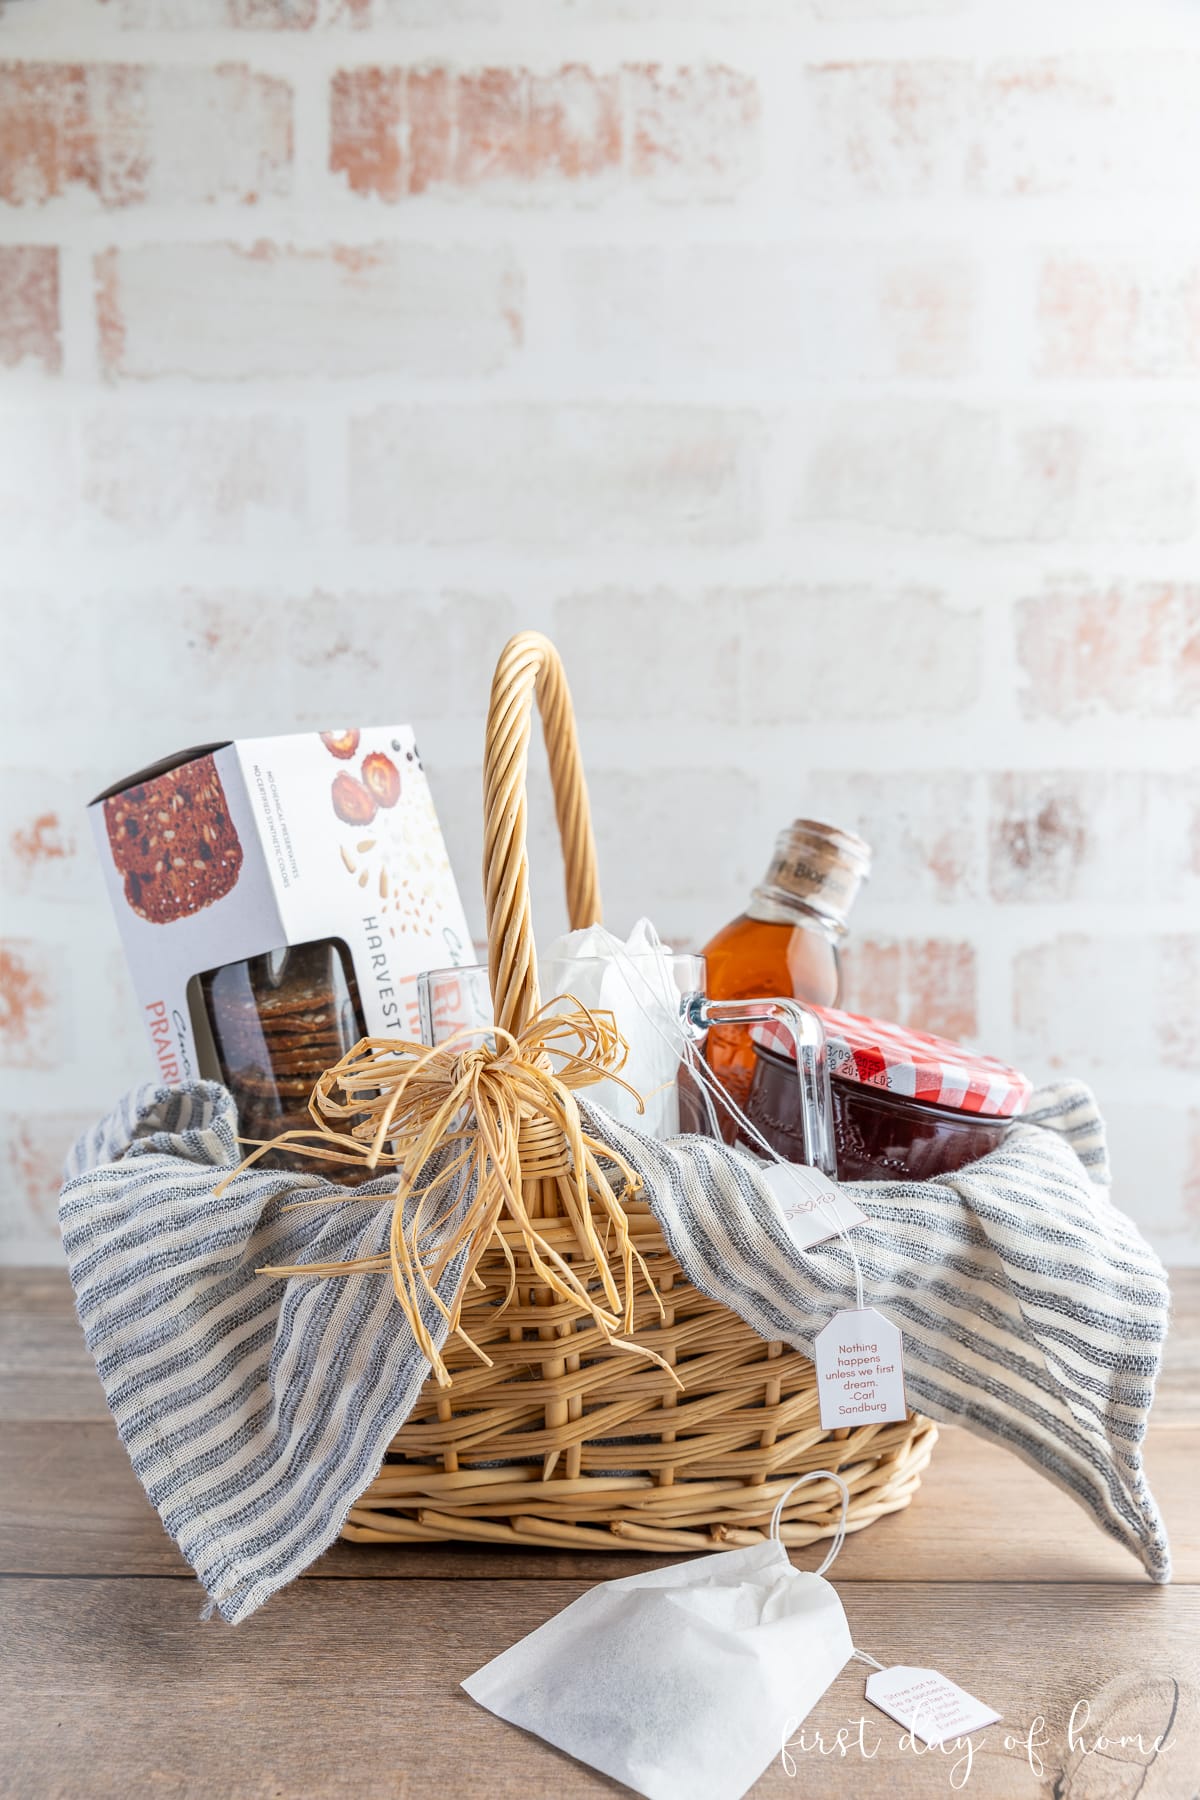 Straw basket filled with fruit preserves, crackers, honey, and homemade herbal tea using dried herbs